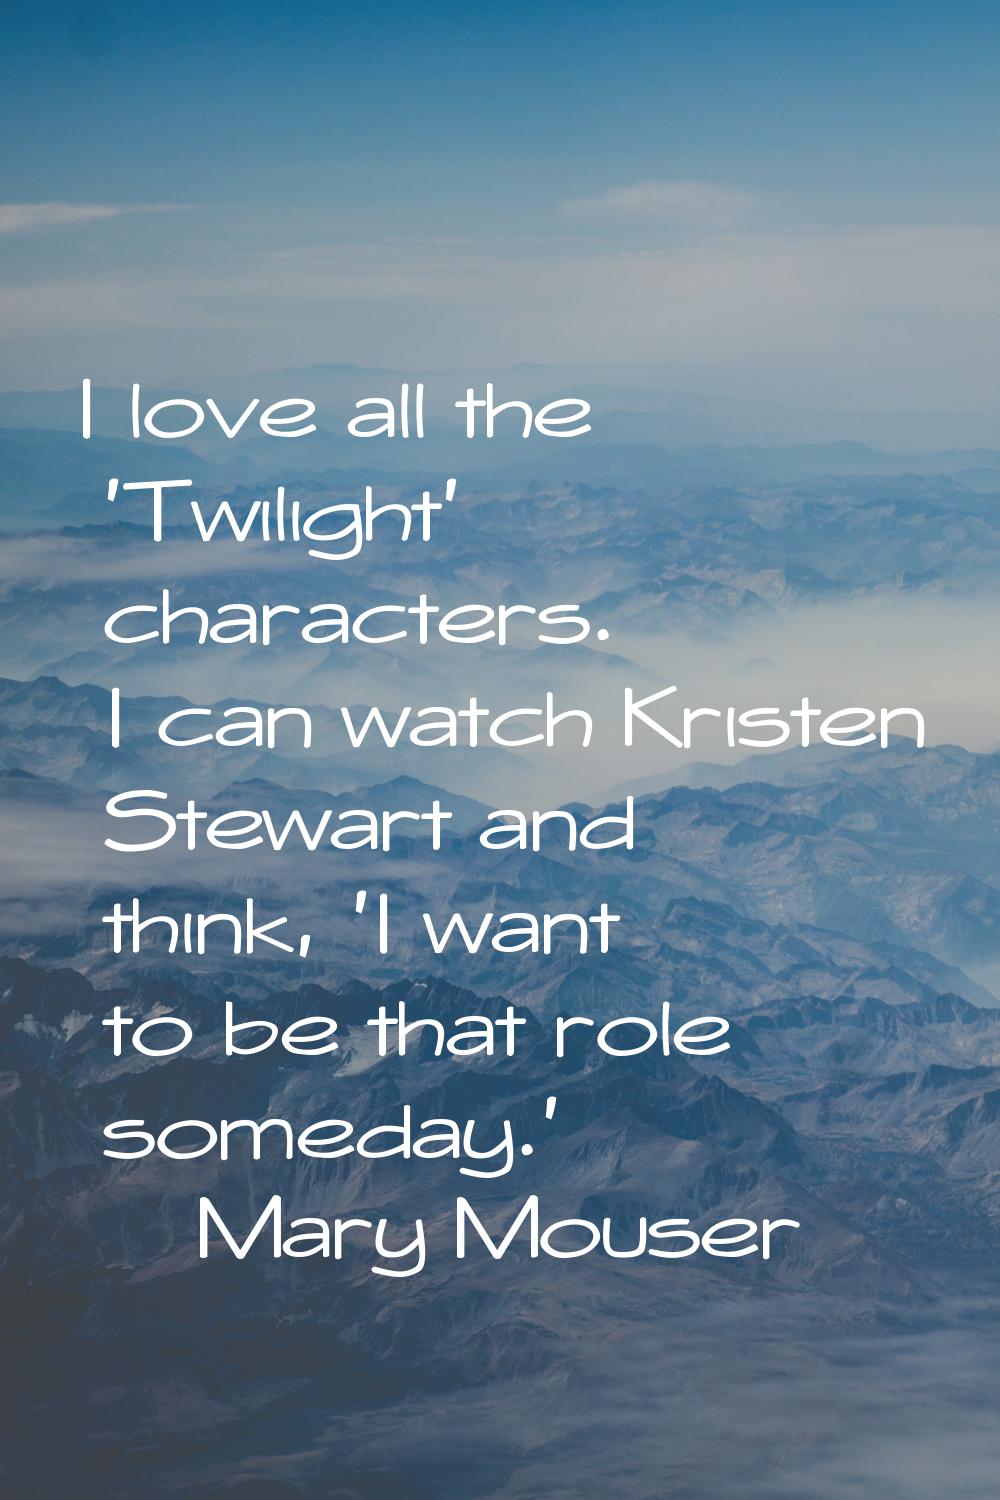 I love all the 'Twilight' characters. I can watch Kristen Stewart and think, 'I want to be that rol